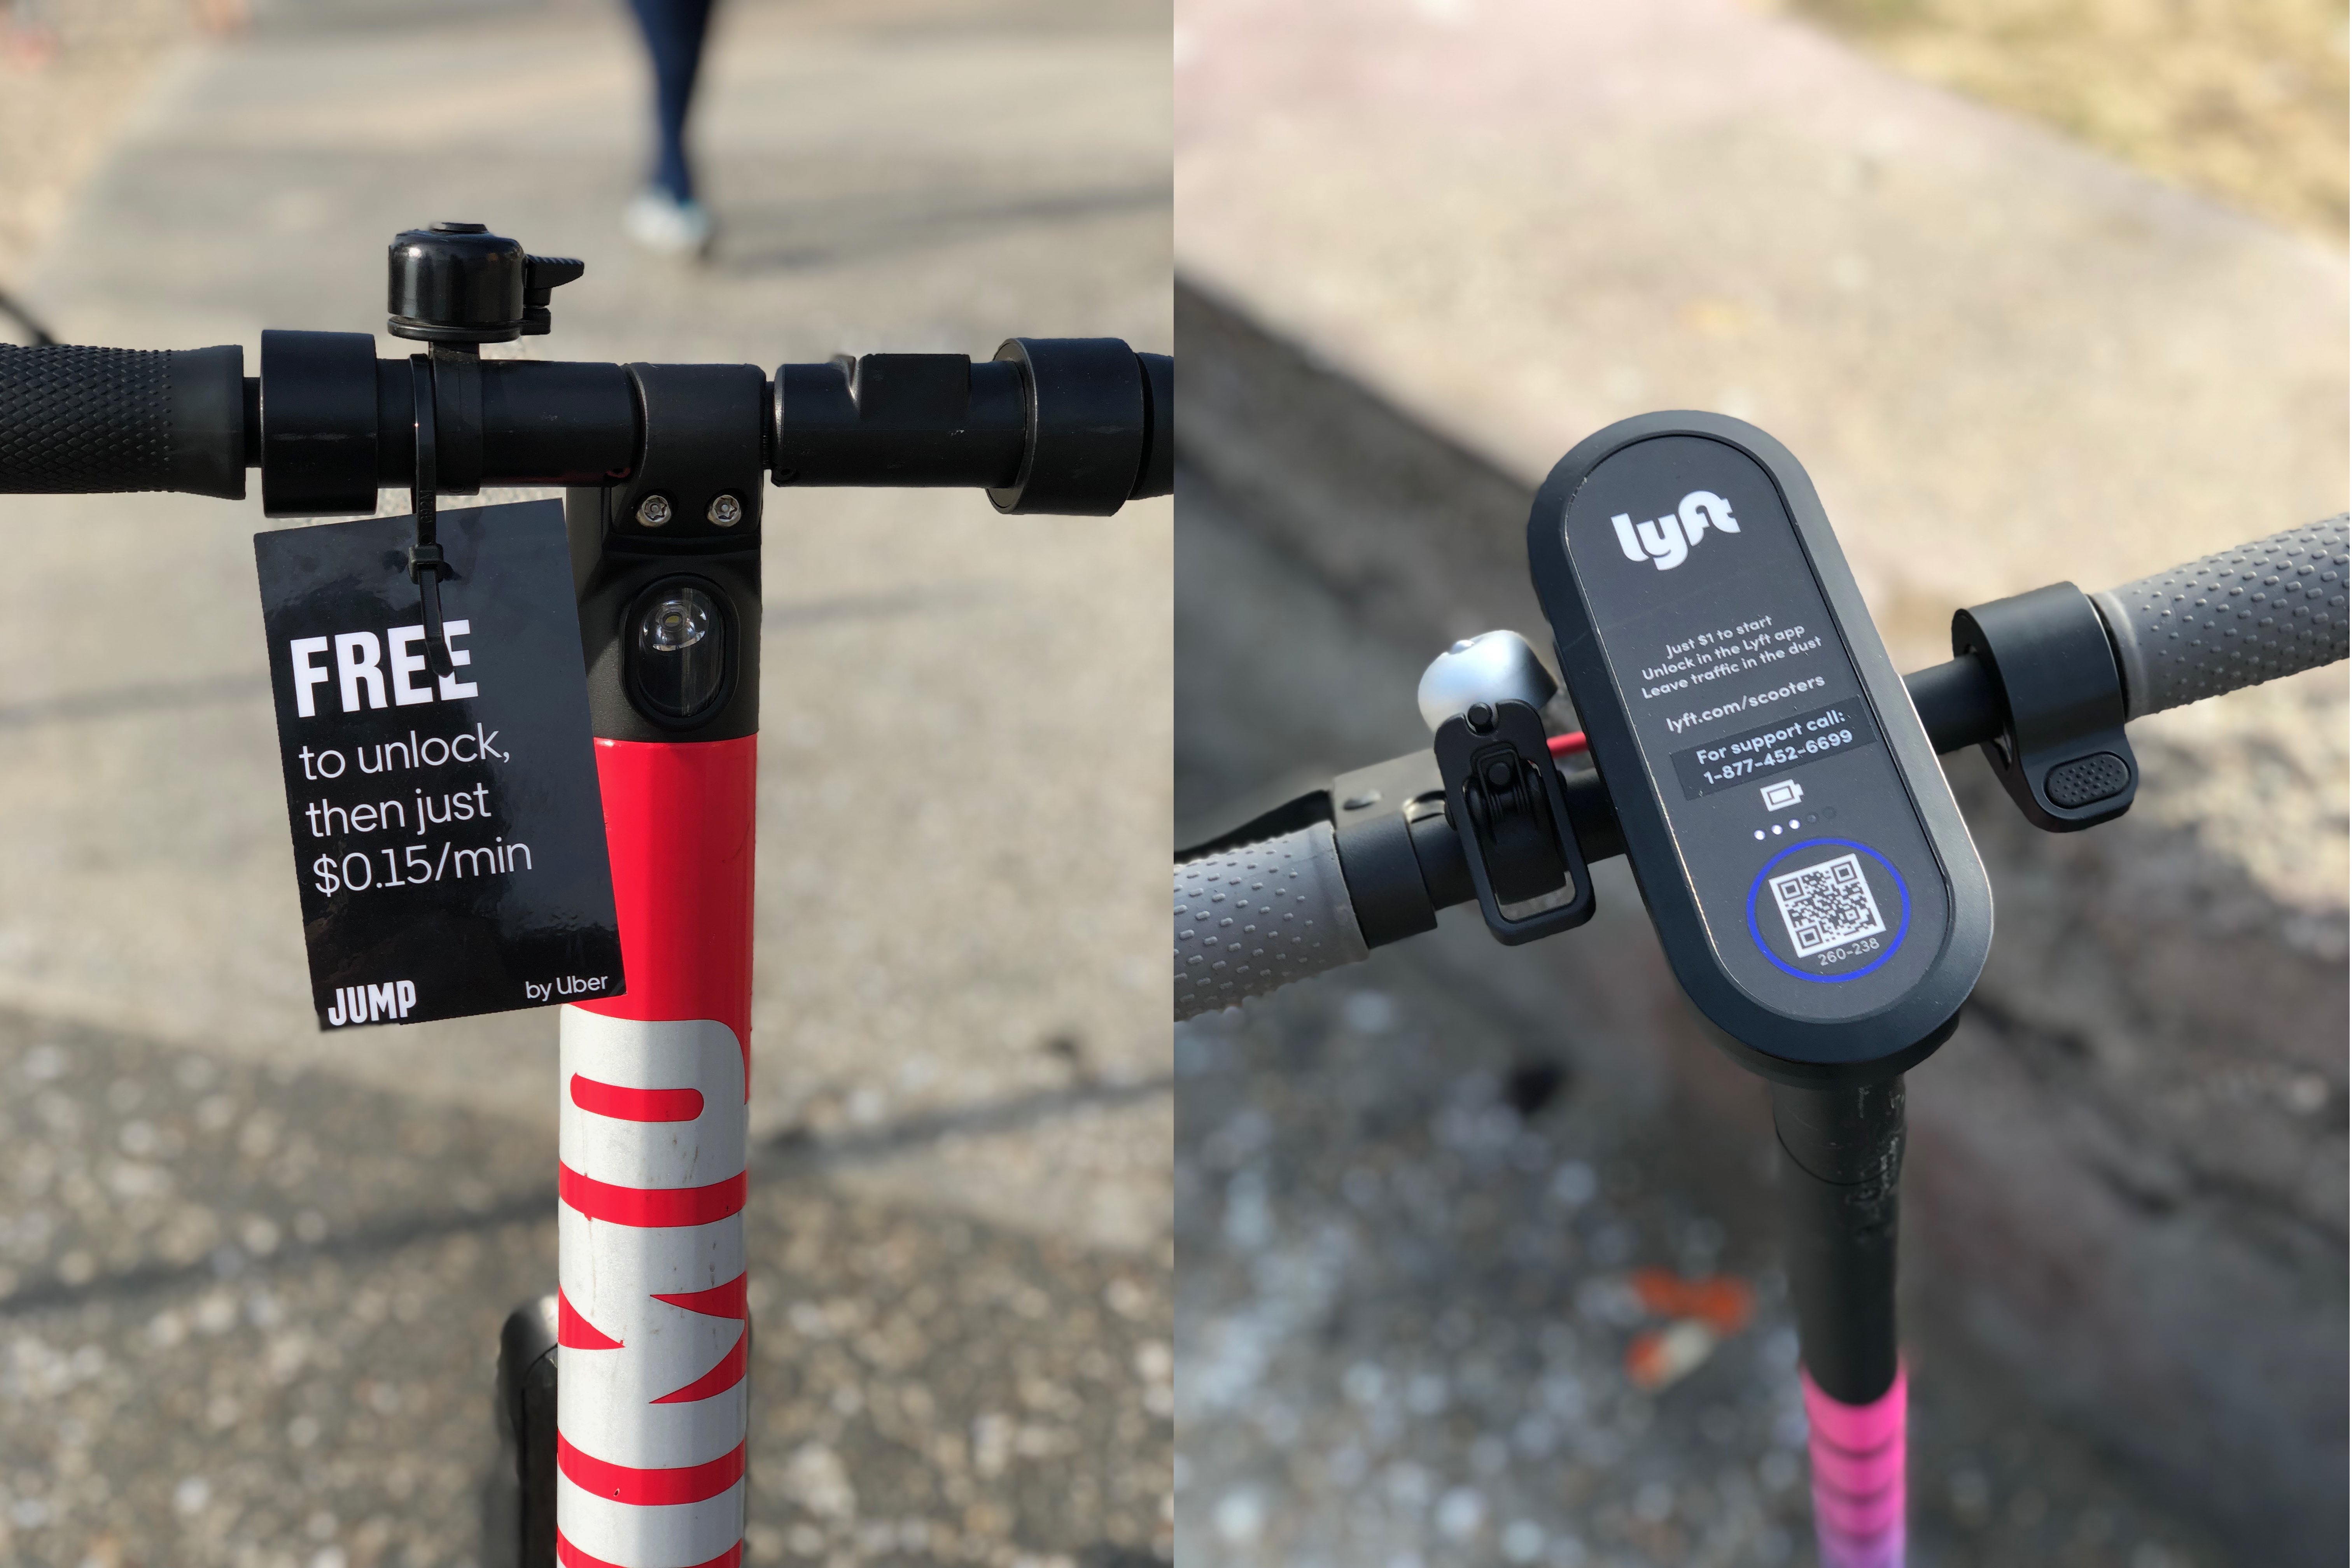 JUMP and Lyft scooters